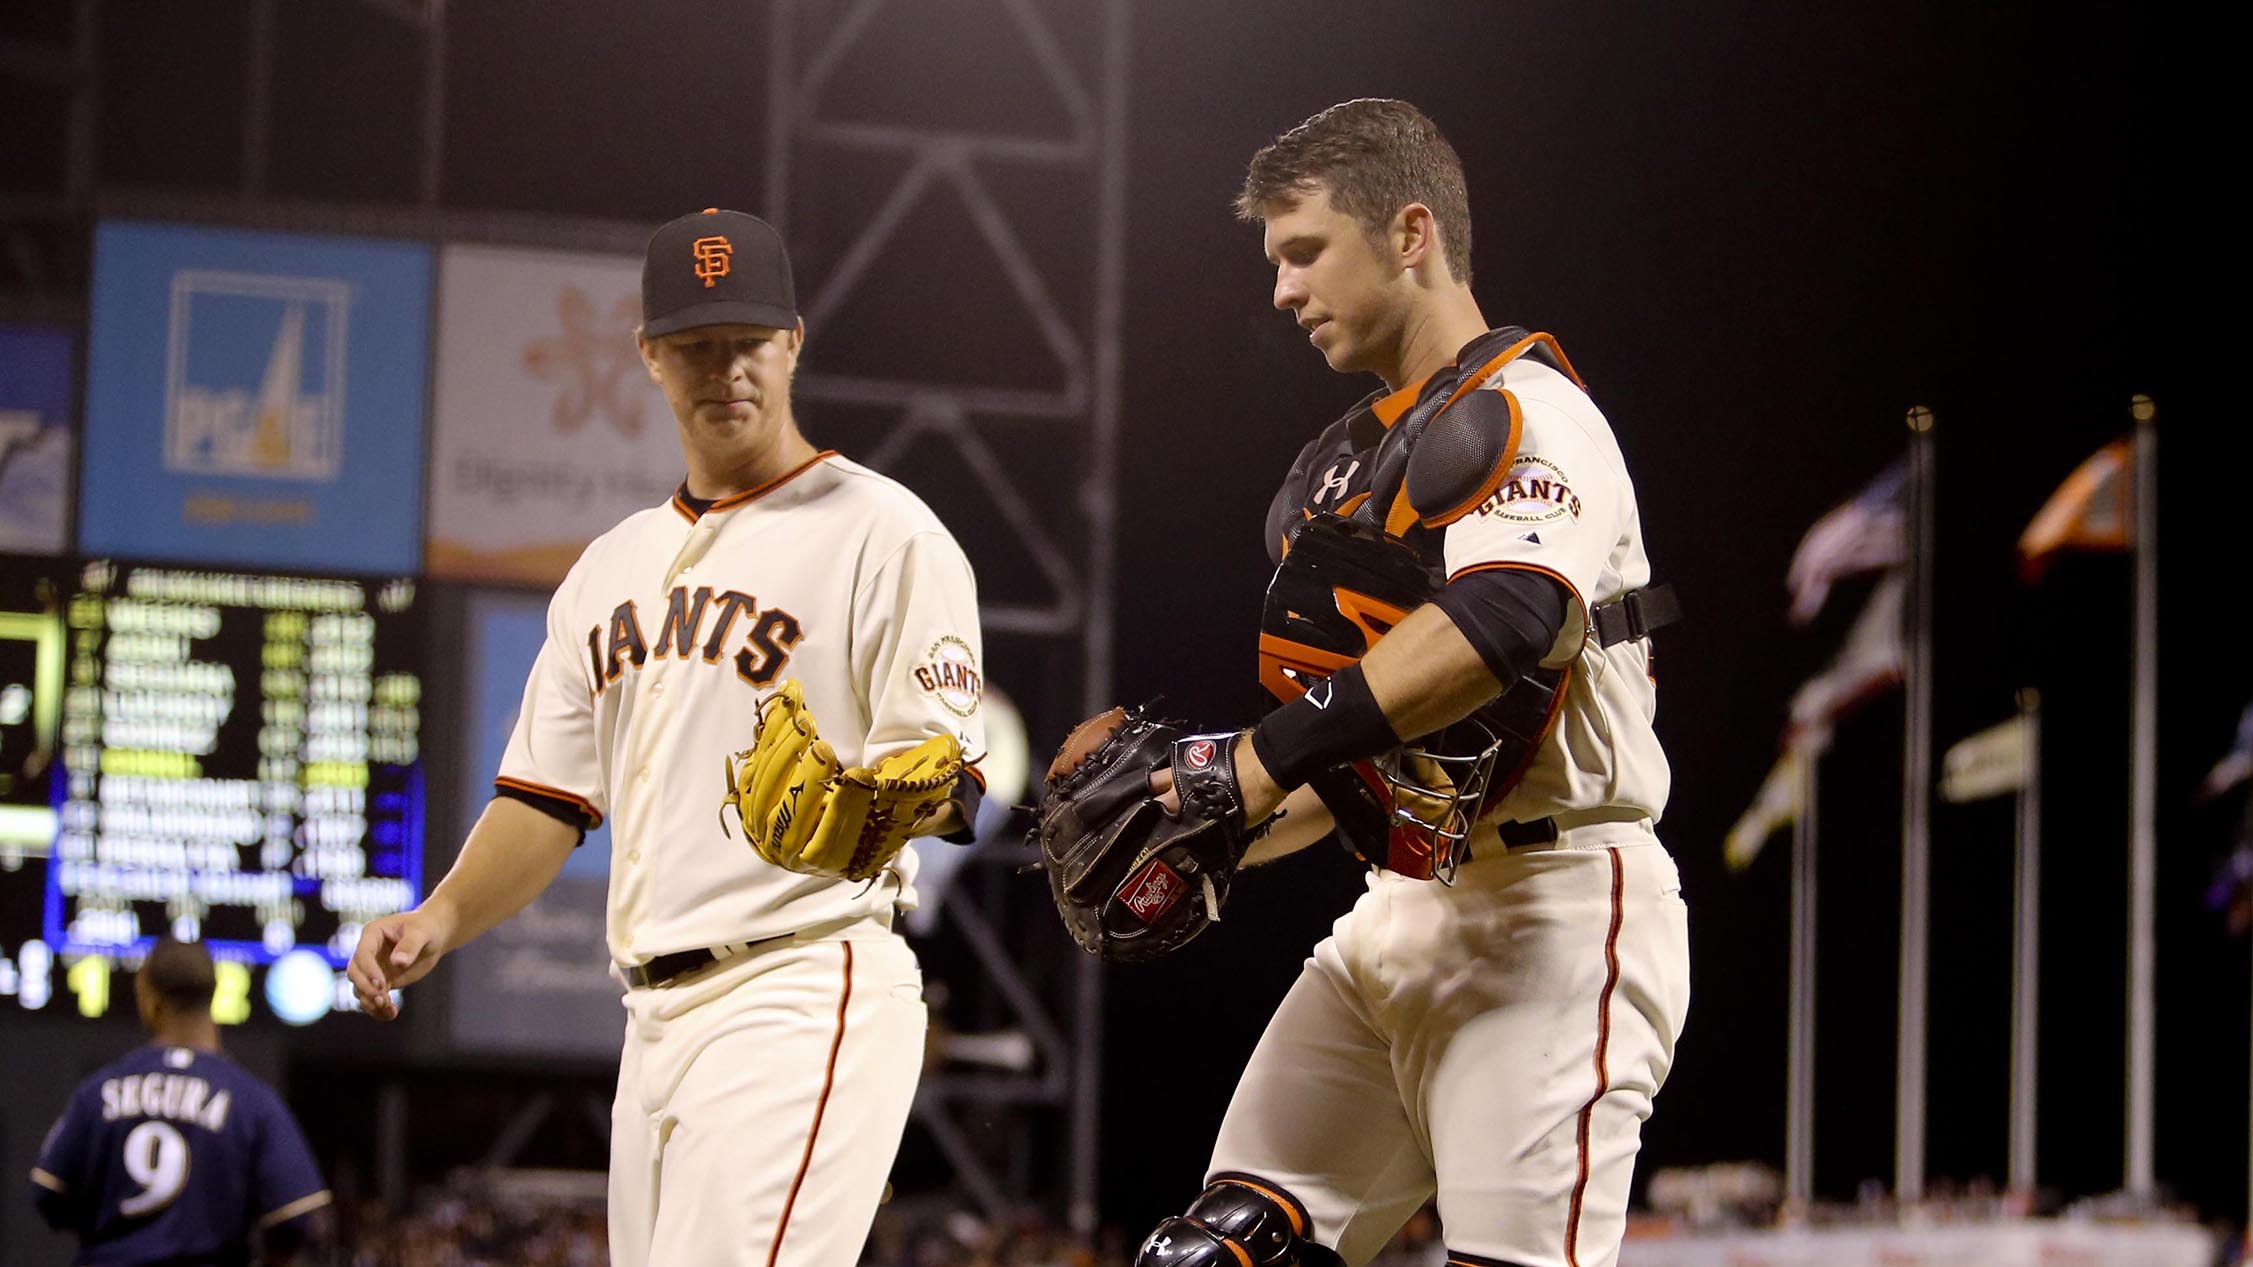 The SF Giants are getting exactly what they paid for this season